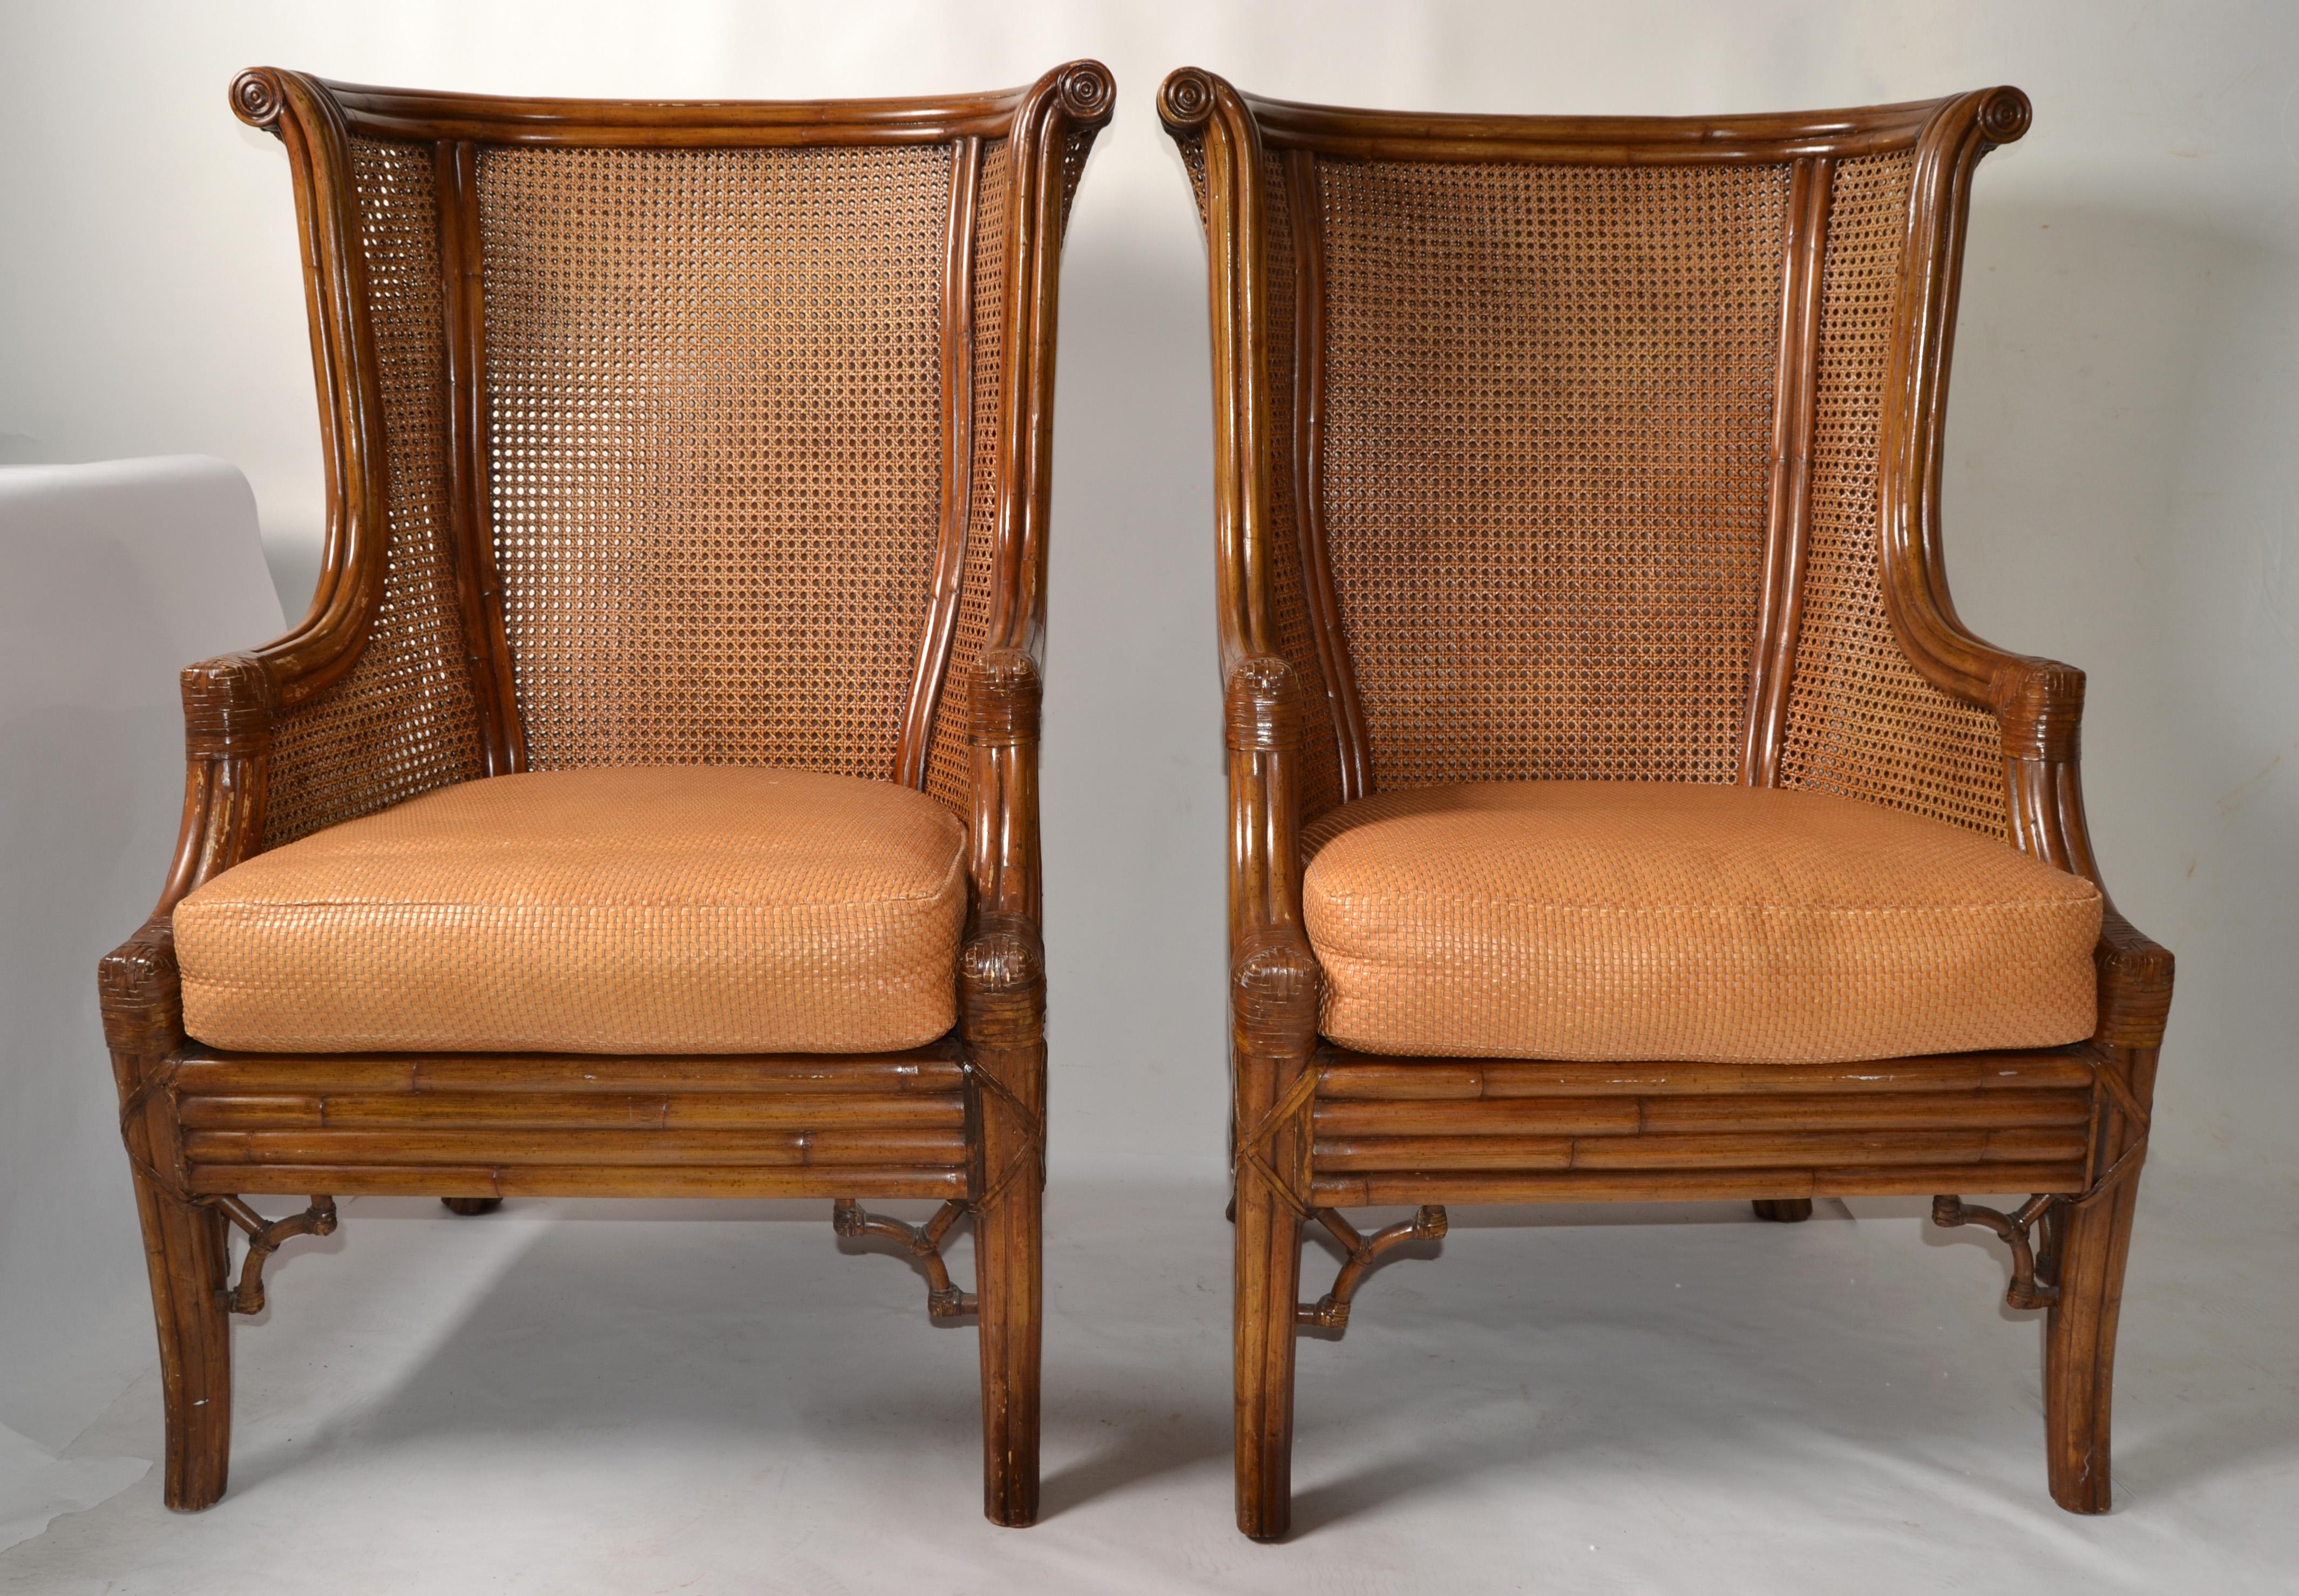 Pair of British Colonial Style Lane Venture Bamboo, Faux Bamboo and handwoven double Caning Wingback Chairs.
Large Lounge Chairs in Bohemian Period Style with a thick Leather Seat Cushion.
Stunning carvings at the Top, very detailed base with Bamboo